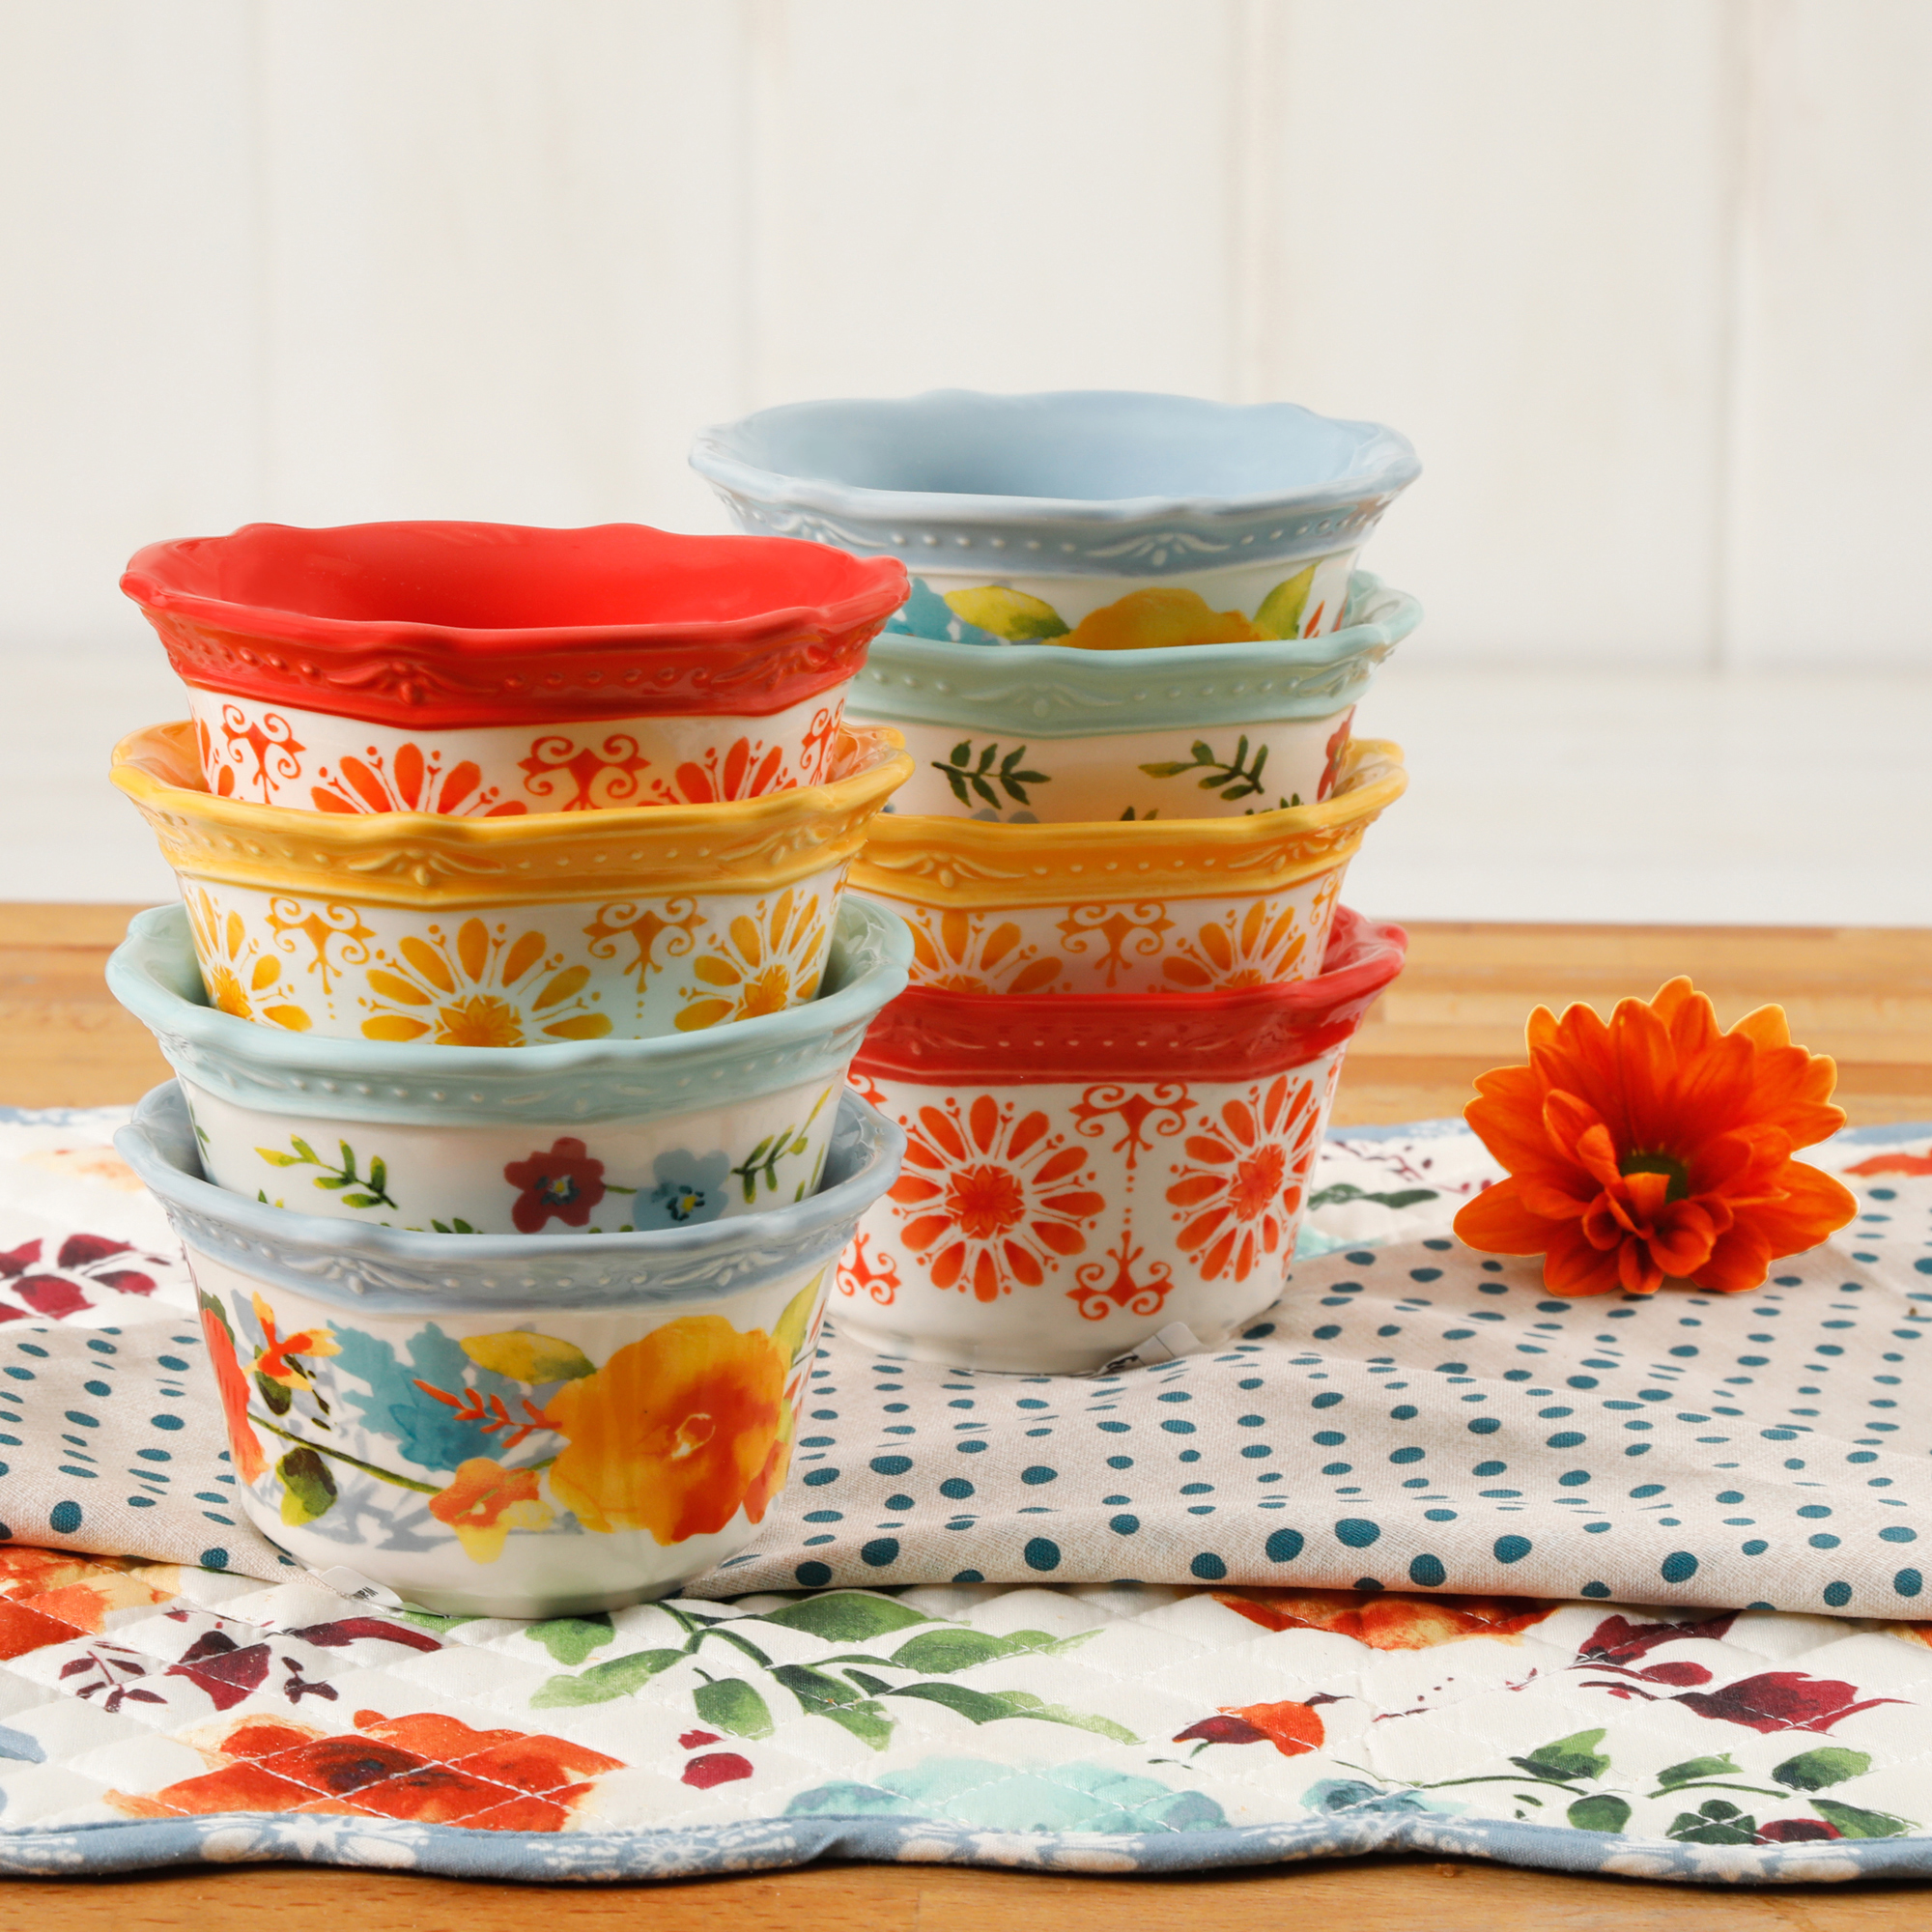 The Pioneer Woman has a new jade kitchenware collection and the pieces are  gorgeous